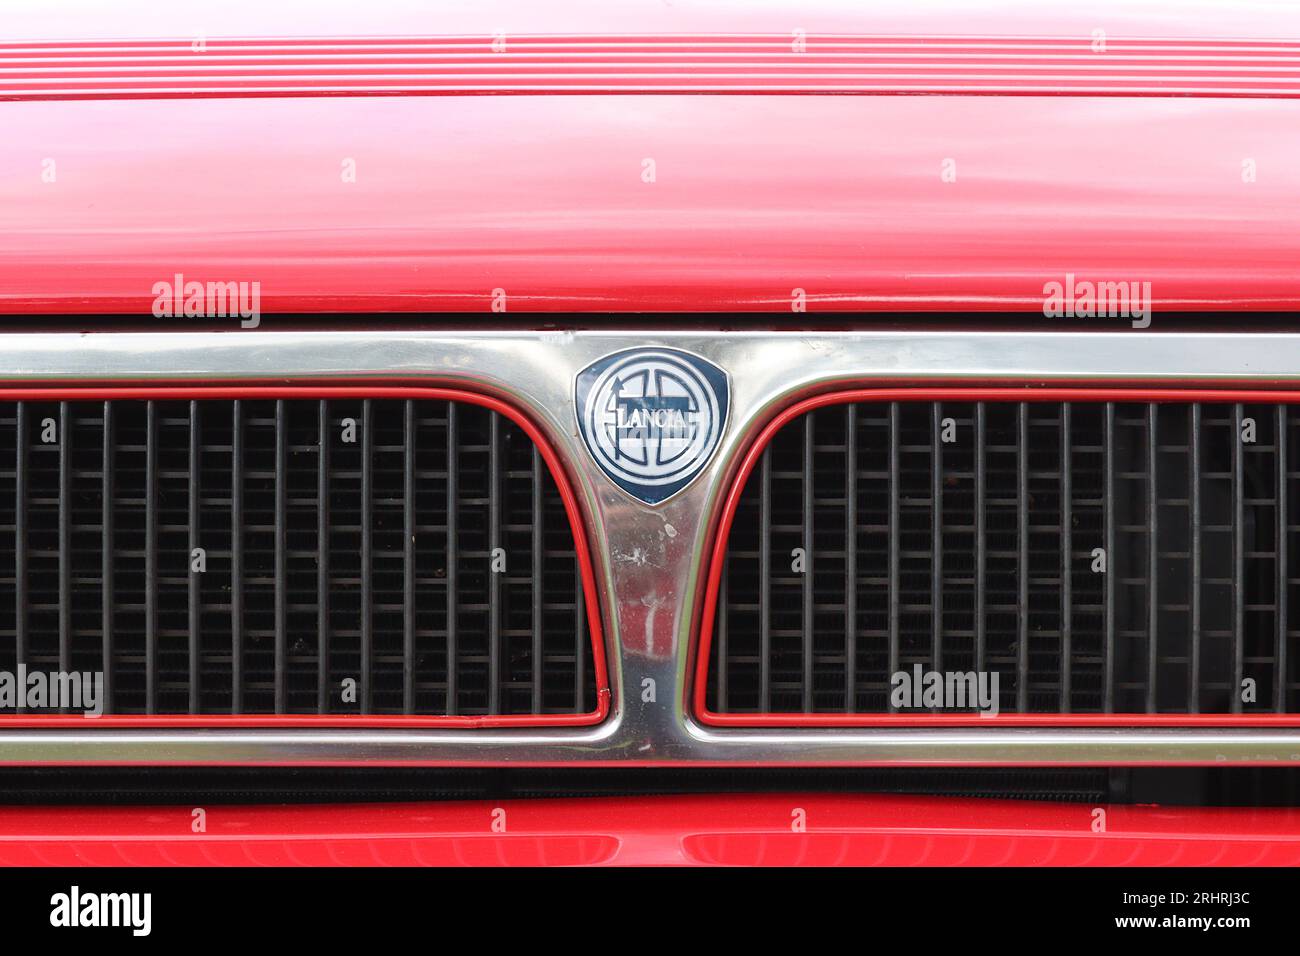 Unmistakable radiator grill of a Lancia Delta Integrale HF 16 valve model, always associated with Lancia’s domination of the World Rally Championship. Stock Photo